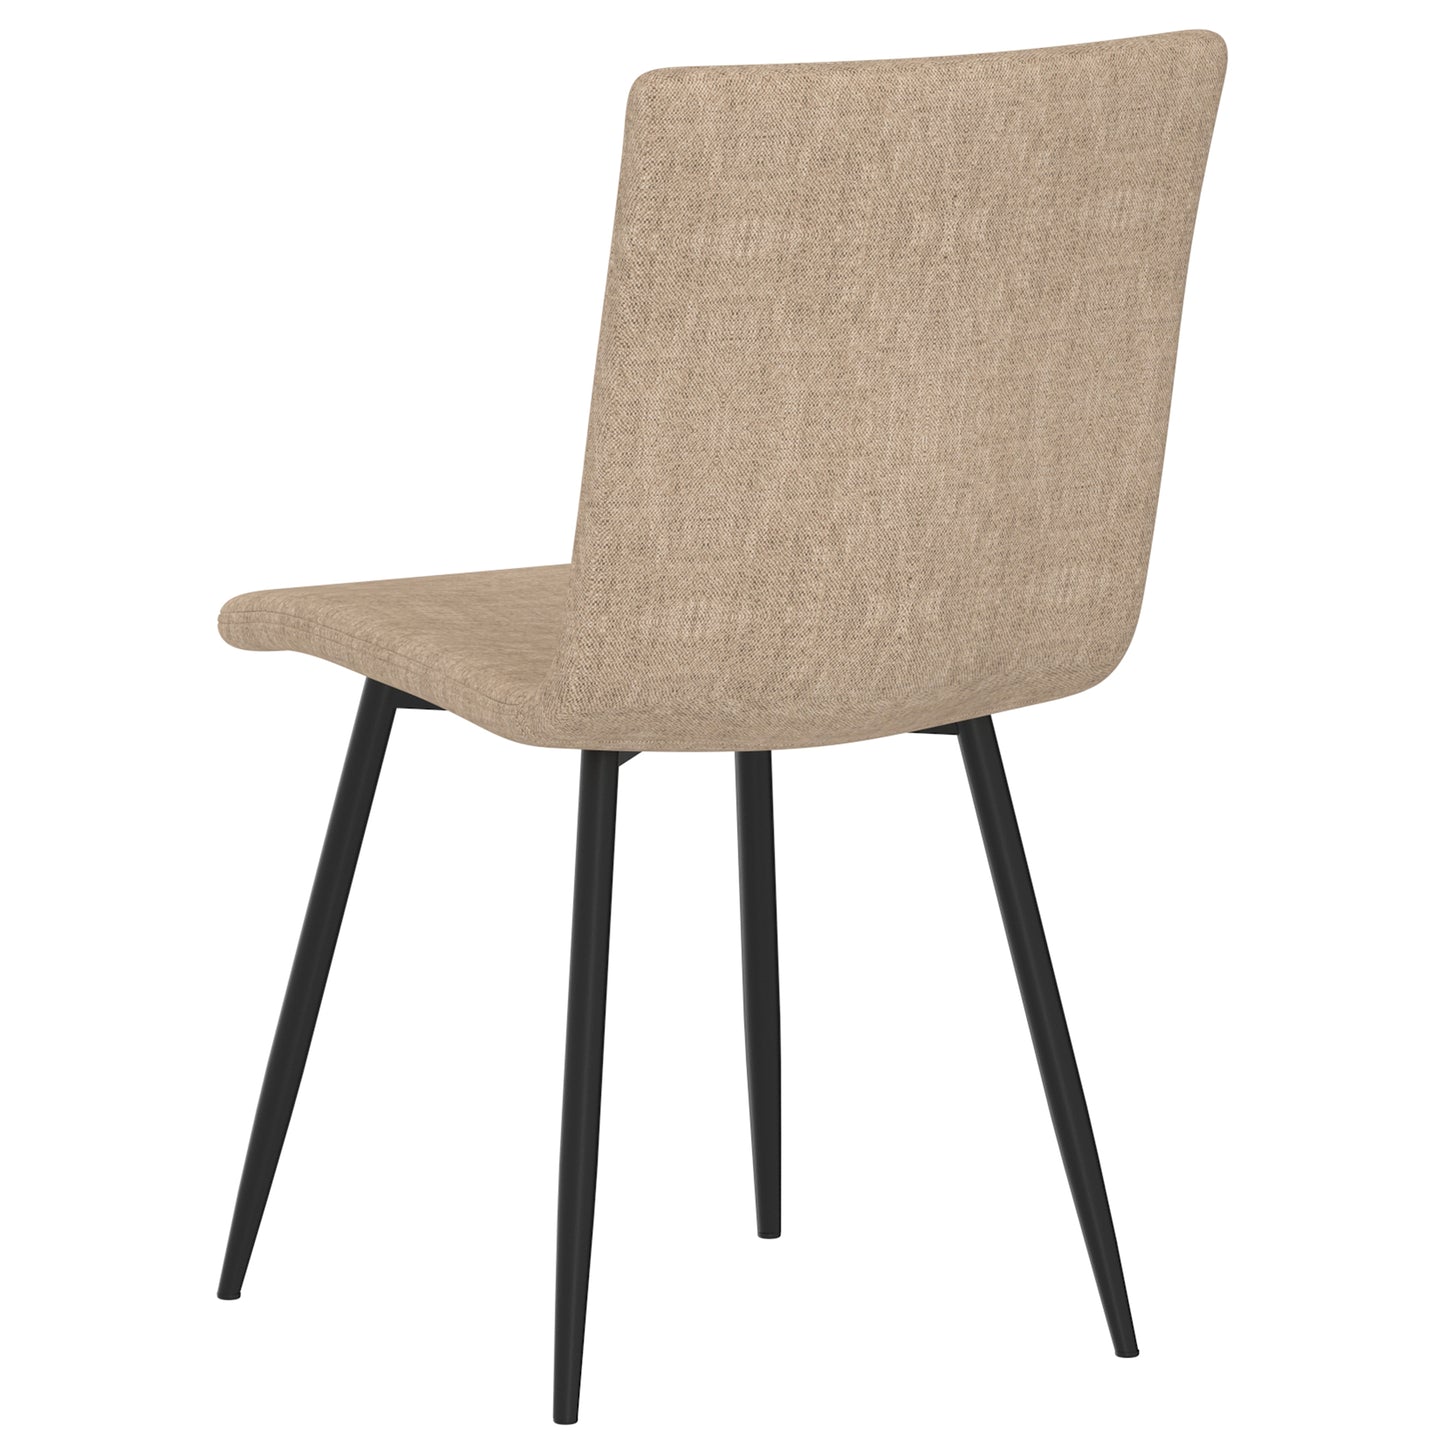 (NORA BEIGE- 4 PACK)- FABRIC- DINING CHAIR